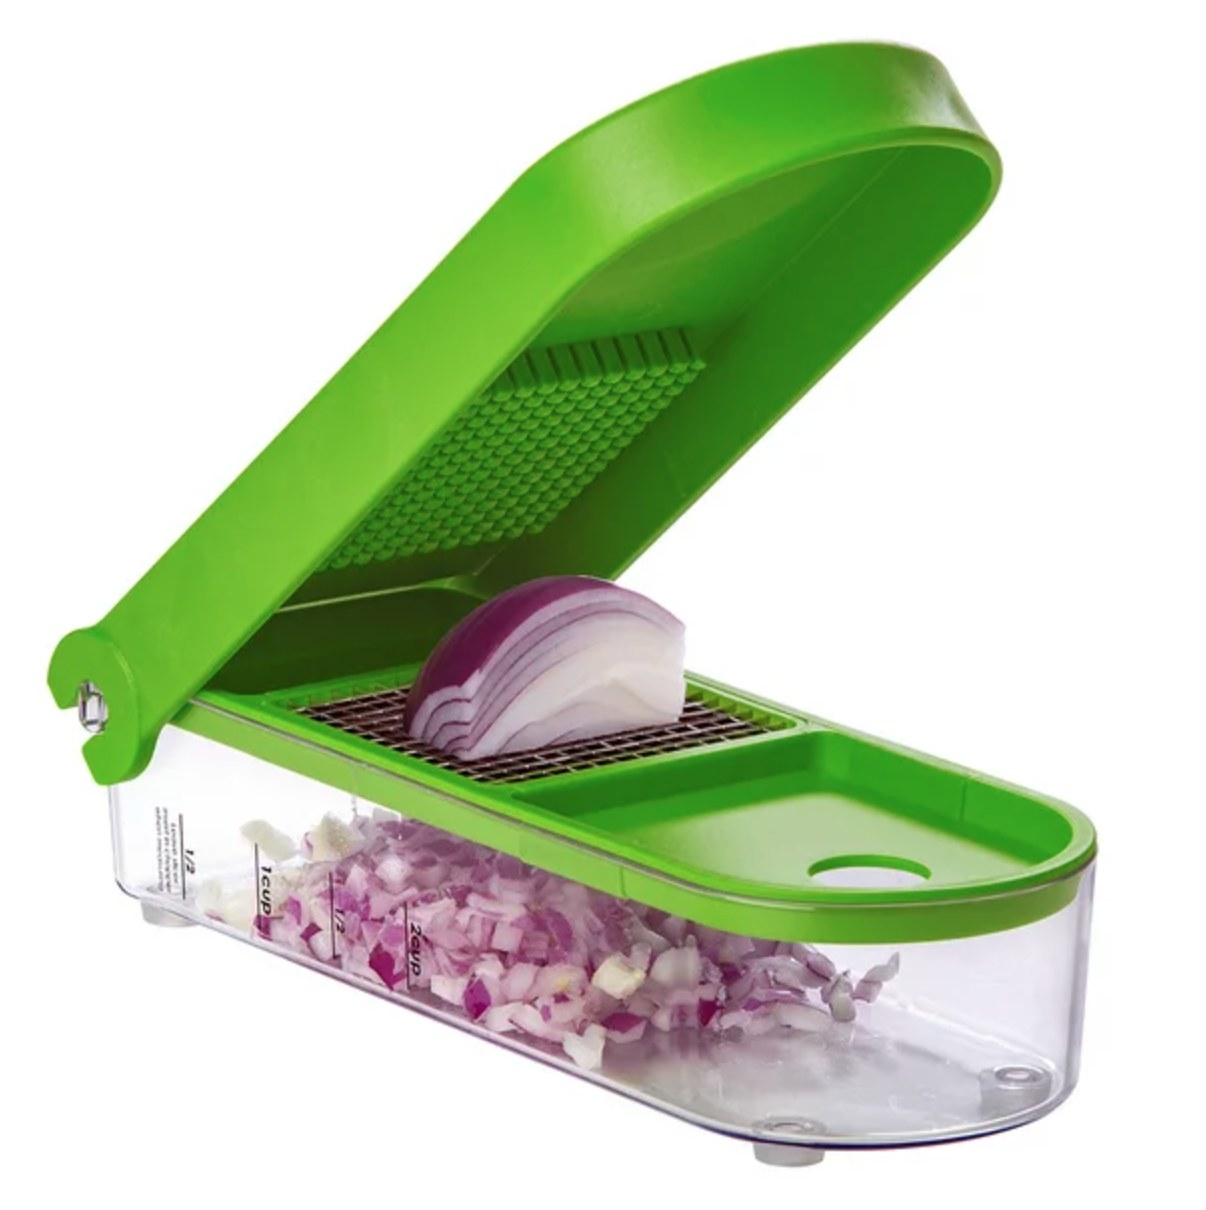 the green chopper with a red onion on the dicing plate and more diced red onion inside